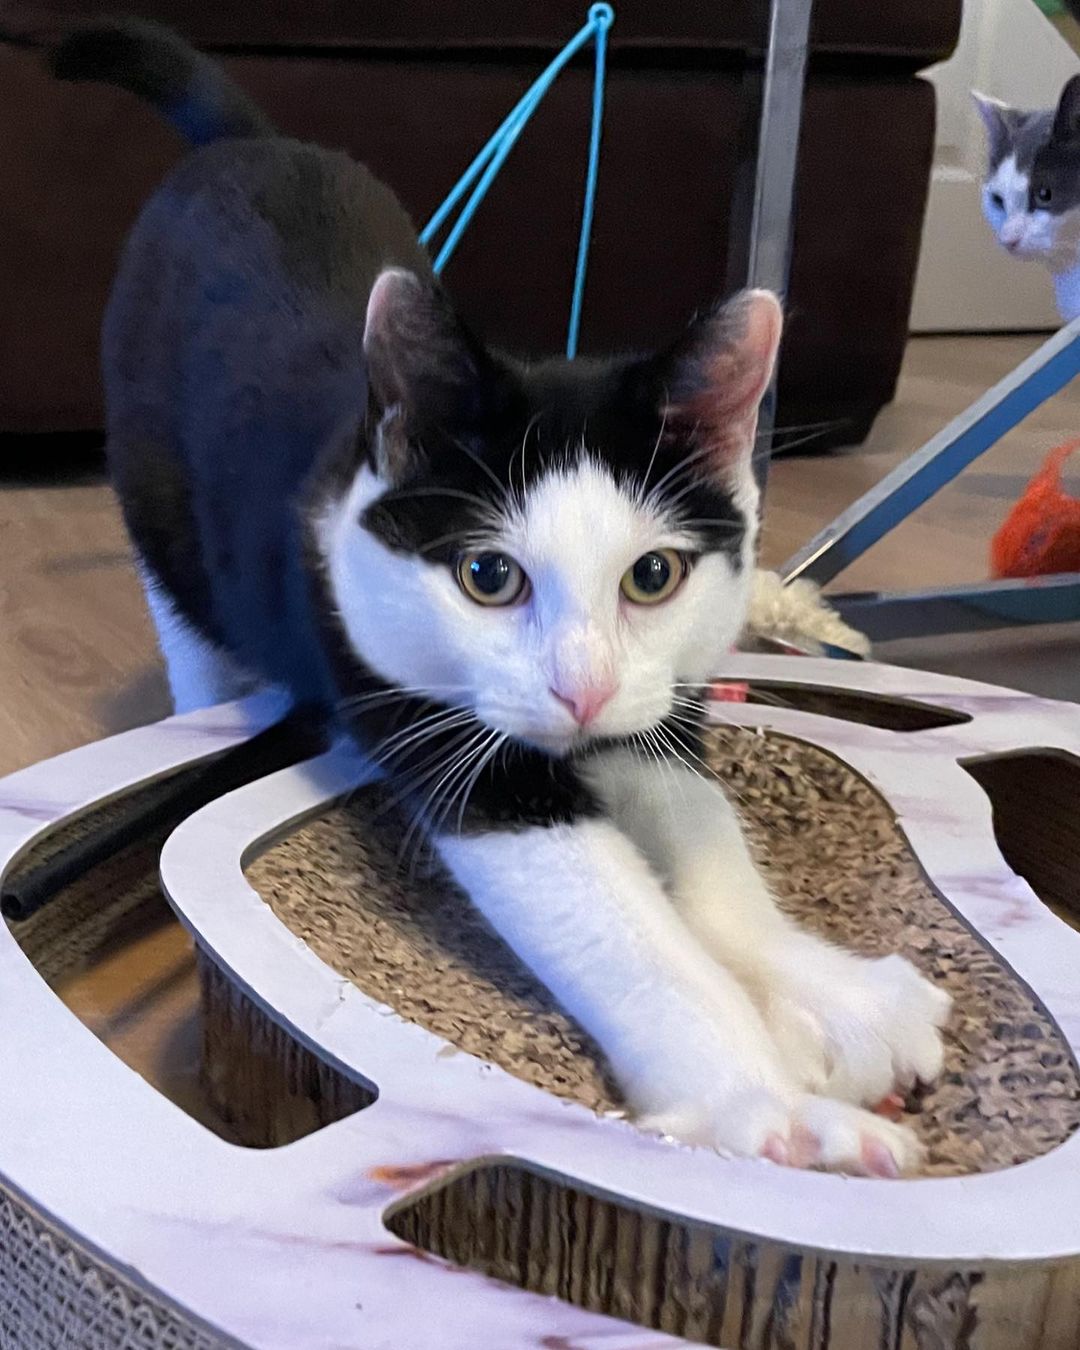 Hi umm hello umm is this thing on?? Oh ok! Hello world!! We are Toby (black and white) and Spencer (grey and white) and we are so happy to meet you all 😻😻 You May remember us as Honey and Spice. That was when we were still at the <a target='_blank' href='https://www.instagram.com/explore/tags/catshelter/'>#catshelter</a> with URIs and hoping for a <a target='_blank' href='https://www.instagram.com/explore/tags/foster/'>#foster</a> home. Well luckily we got one! And we’re all better now too 😃😃 We are sweet and playful 5 month old male <a target='_blank' href='https://www.instagram.com/explore/tags/kittens/'>#kittens</a> now ready for our <a target='_blank' href='https://www.instagram.com/explore/tags/fureverhome/'>#fureverhome</a> We also get along great with other <a target='_blank' href='https://www.instagram.com/explore/tags/kitties/'>#kitties</a> 💗 Are you looking for two <a target='_blank' href='https://www.instagram.com/explore/tags/handsomekitties/'>#handsomekitties</a> to call your own? Email our <a target='_blank' href='https://www.instagram.com/explore/tags/furriends/'>#furriends</a> at ForAnimalsNYC@gmail.com and ask about us, Toby and Spencer 🐱🐱 For faster processing, fill out the editable PDF adoption-application form at
https://www.foranimalsinc.com/adopt/our-adoption-process/ and email it to ForAnimalsNYC@gmail.com <a target='_blank' href='https://www.instagram.com/explore/tags/adoptdontshop/'>#adoptdontshop</a> <a target='_blank' href='https://www.instagram.com/explore/tags/rescueismyfavoritebreed/'>#rescueismyfavoritebreed</a> <a target='_blank' href='https://www.instagram.com/explore/tags/rescuekittens/'>#rescuekittens</a> <a target='_blank' href='https://www.instagram.com/explore/tags/kittensofinstagram/'>#kittensofinstagram</a> <a target='_blank' href='https://www.instagram.com/explore/tags/fosteringsaveslives/'>#fosteringsaveslives</a> <a target='_blank' href='https://www.instagram.com/explore/tags/tnr/'>#tnr</a>